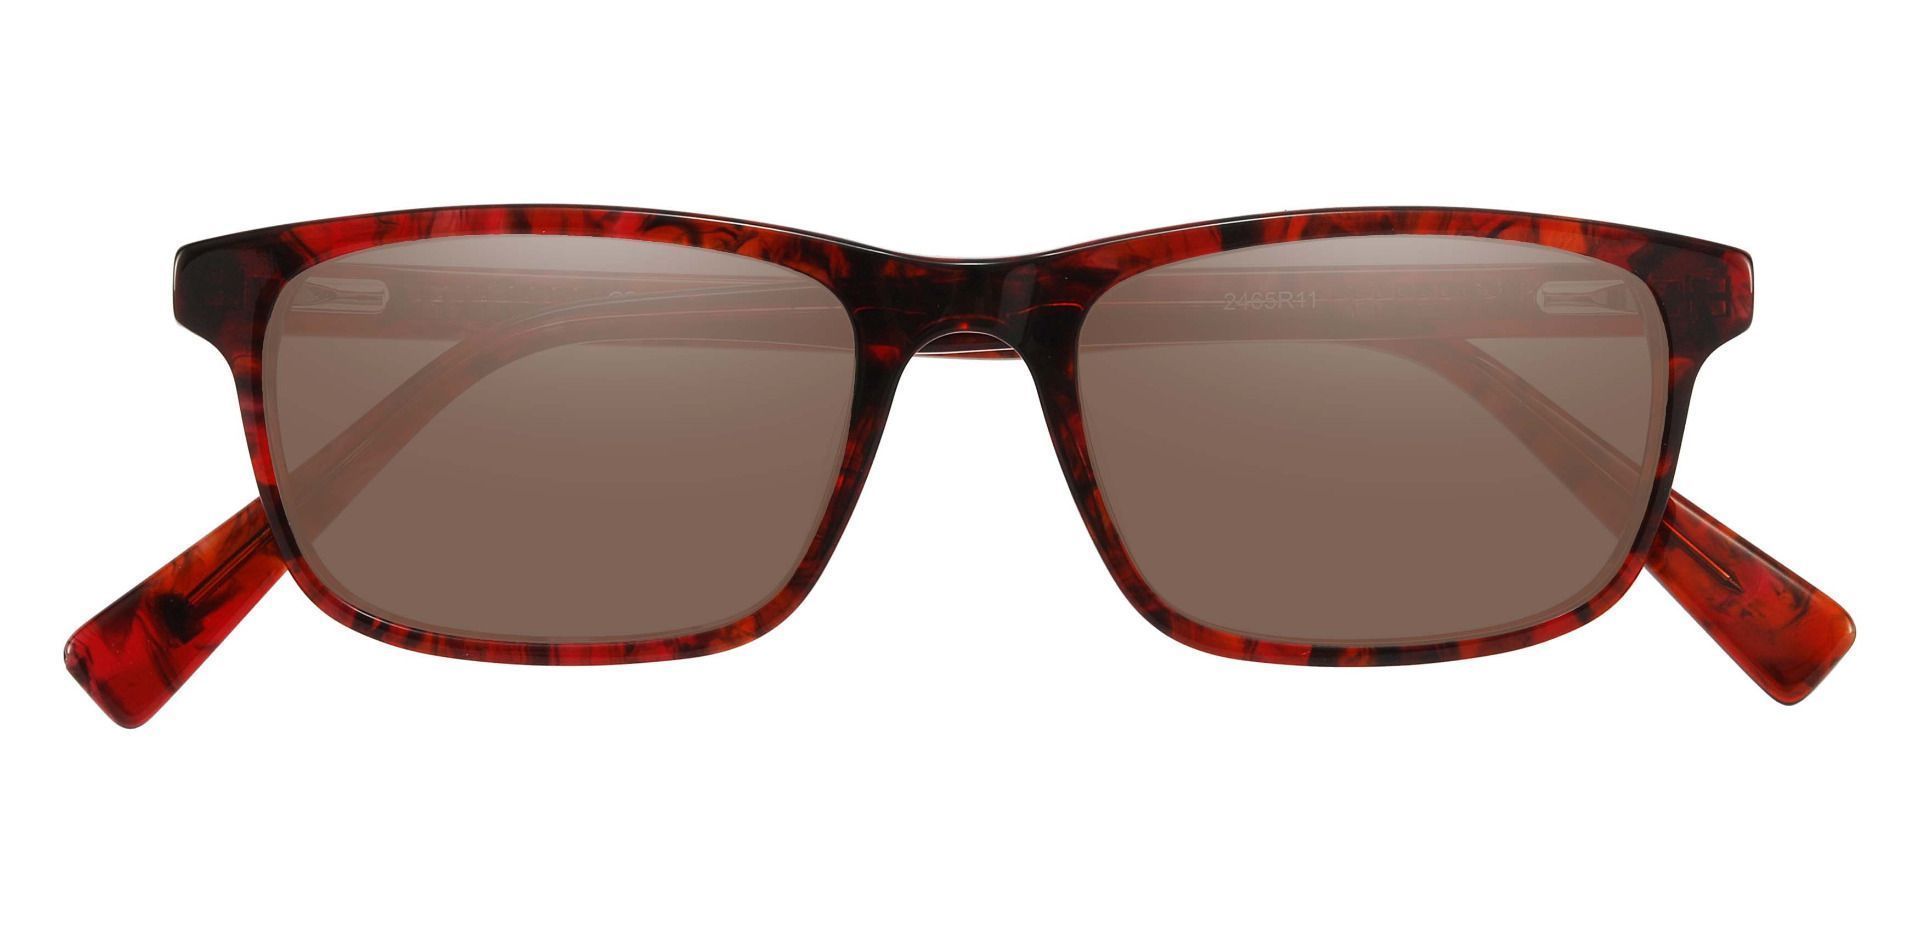 Munich Rectangle Reading Sunglasses - Red Frame With Brown Lenses